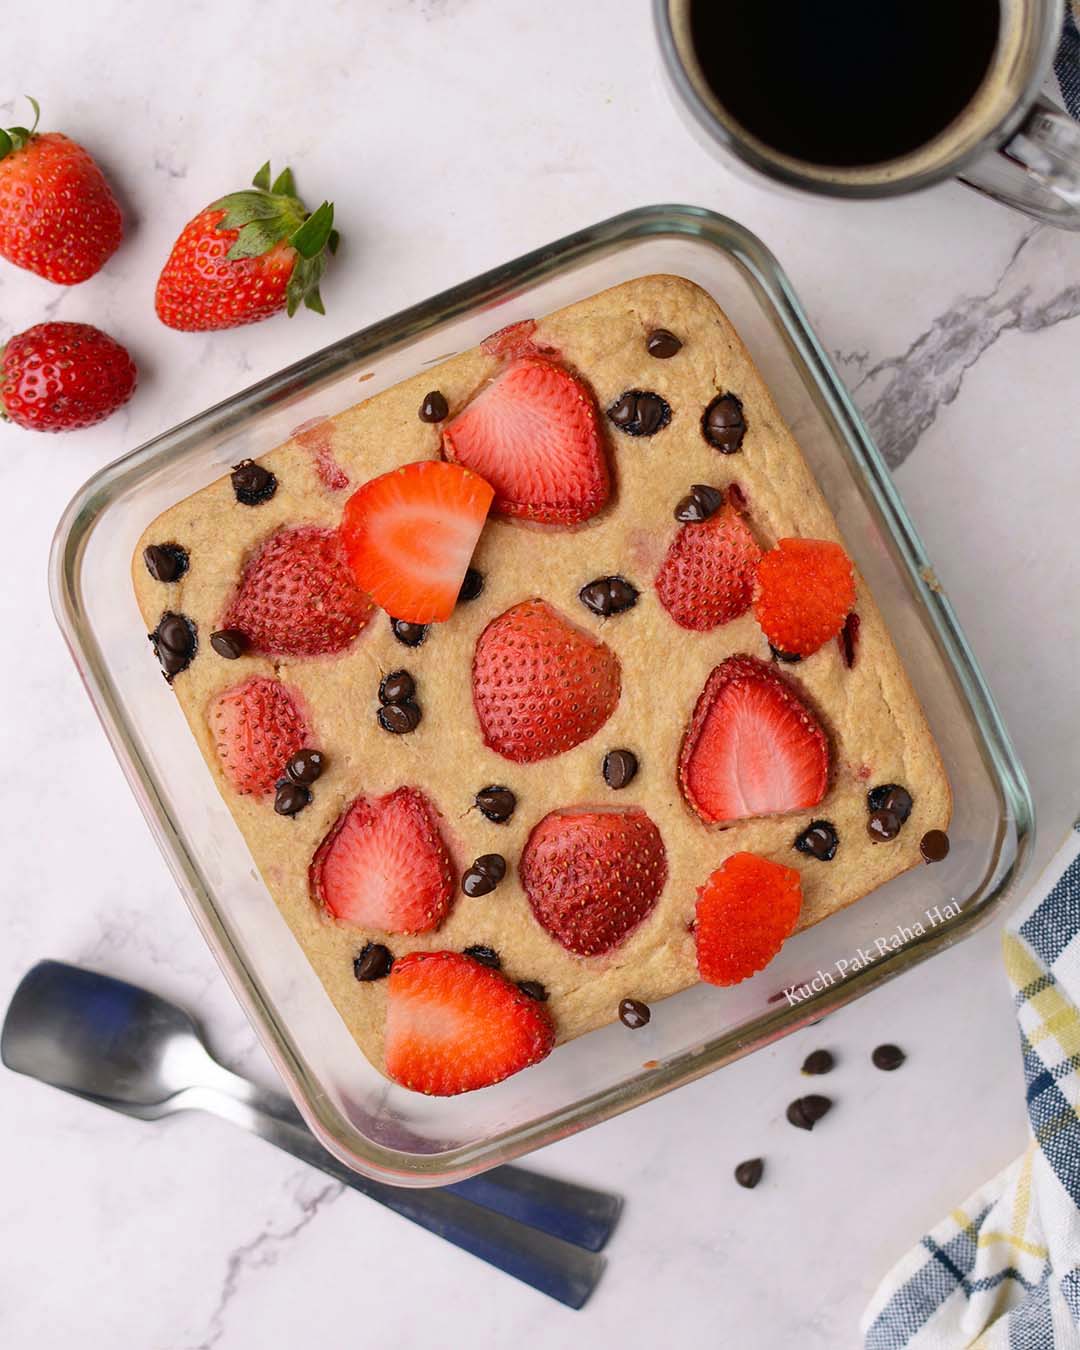 Eggless Baked Strawberry Chocolate Chips Baked Oatmeal